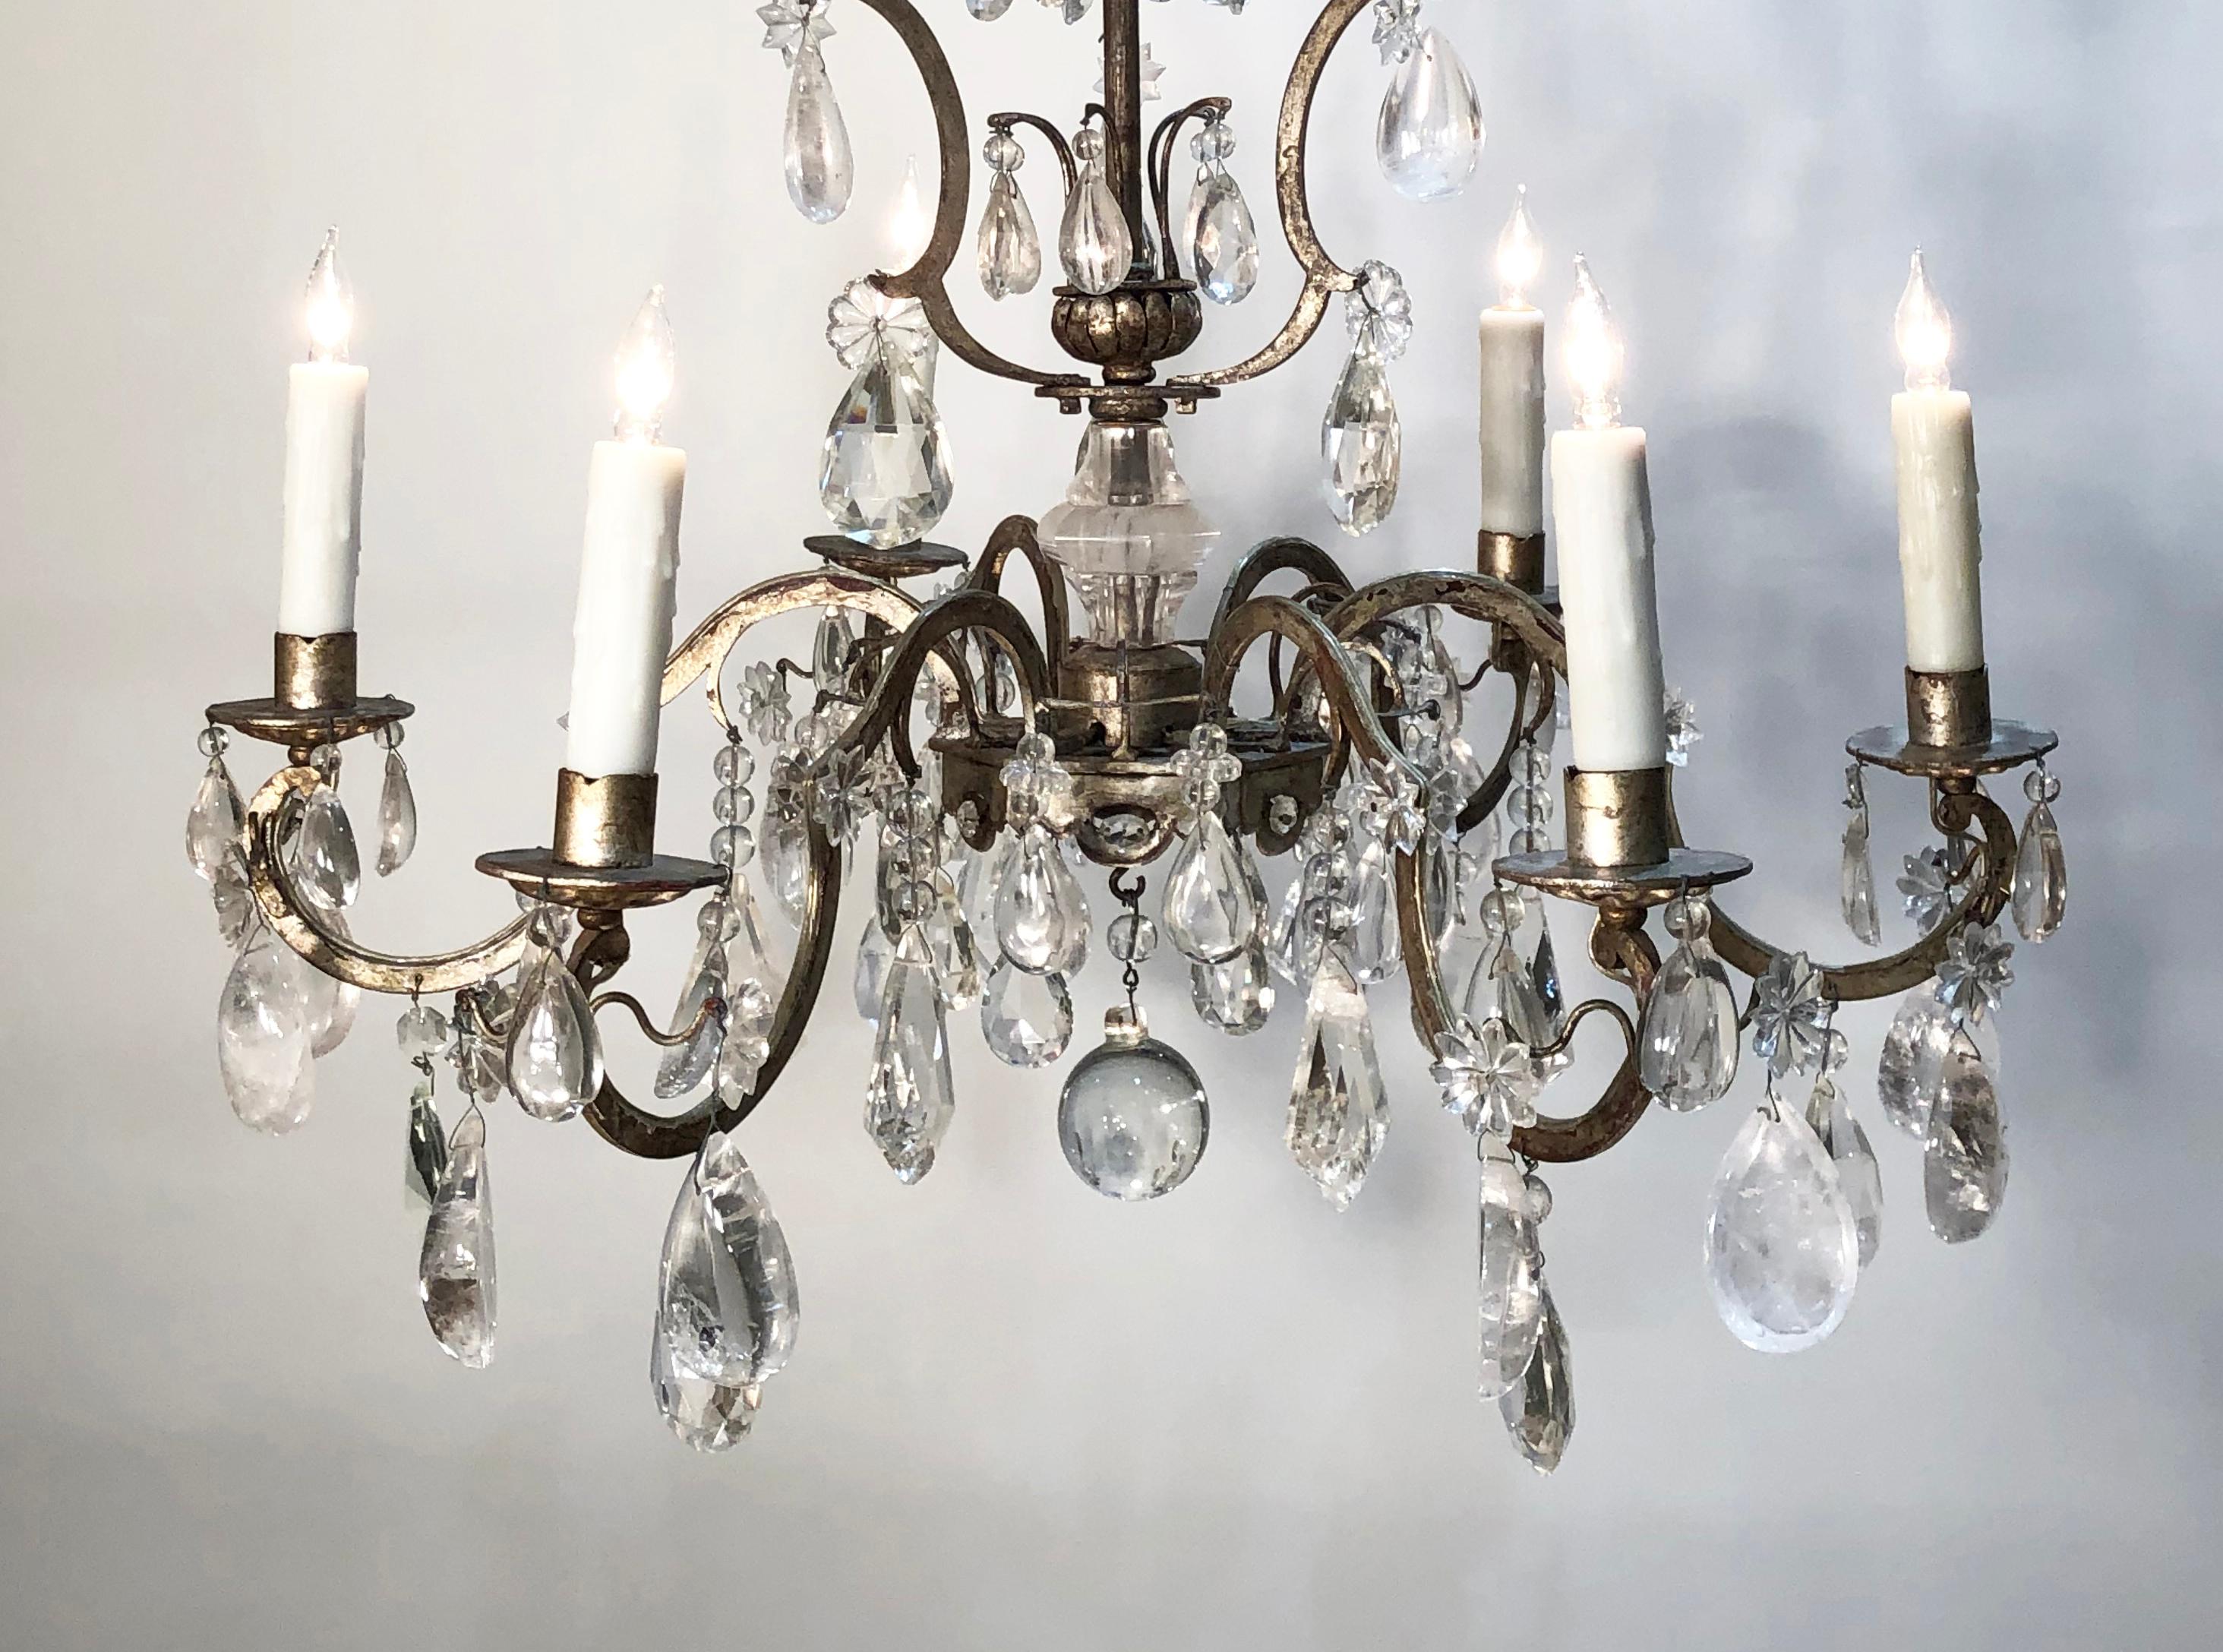 Elegant mid-20th century rock crystal and silver leaf Italian chandelier. This rock crystal and silver leaf chandelier is in the 18th century chinoiserie style. The chandelier frame is steel with silver leaf and is adorned with rock crystal pendants.